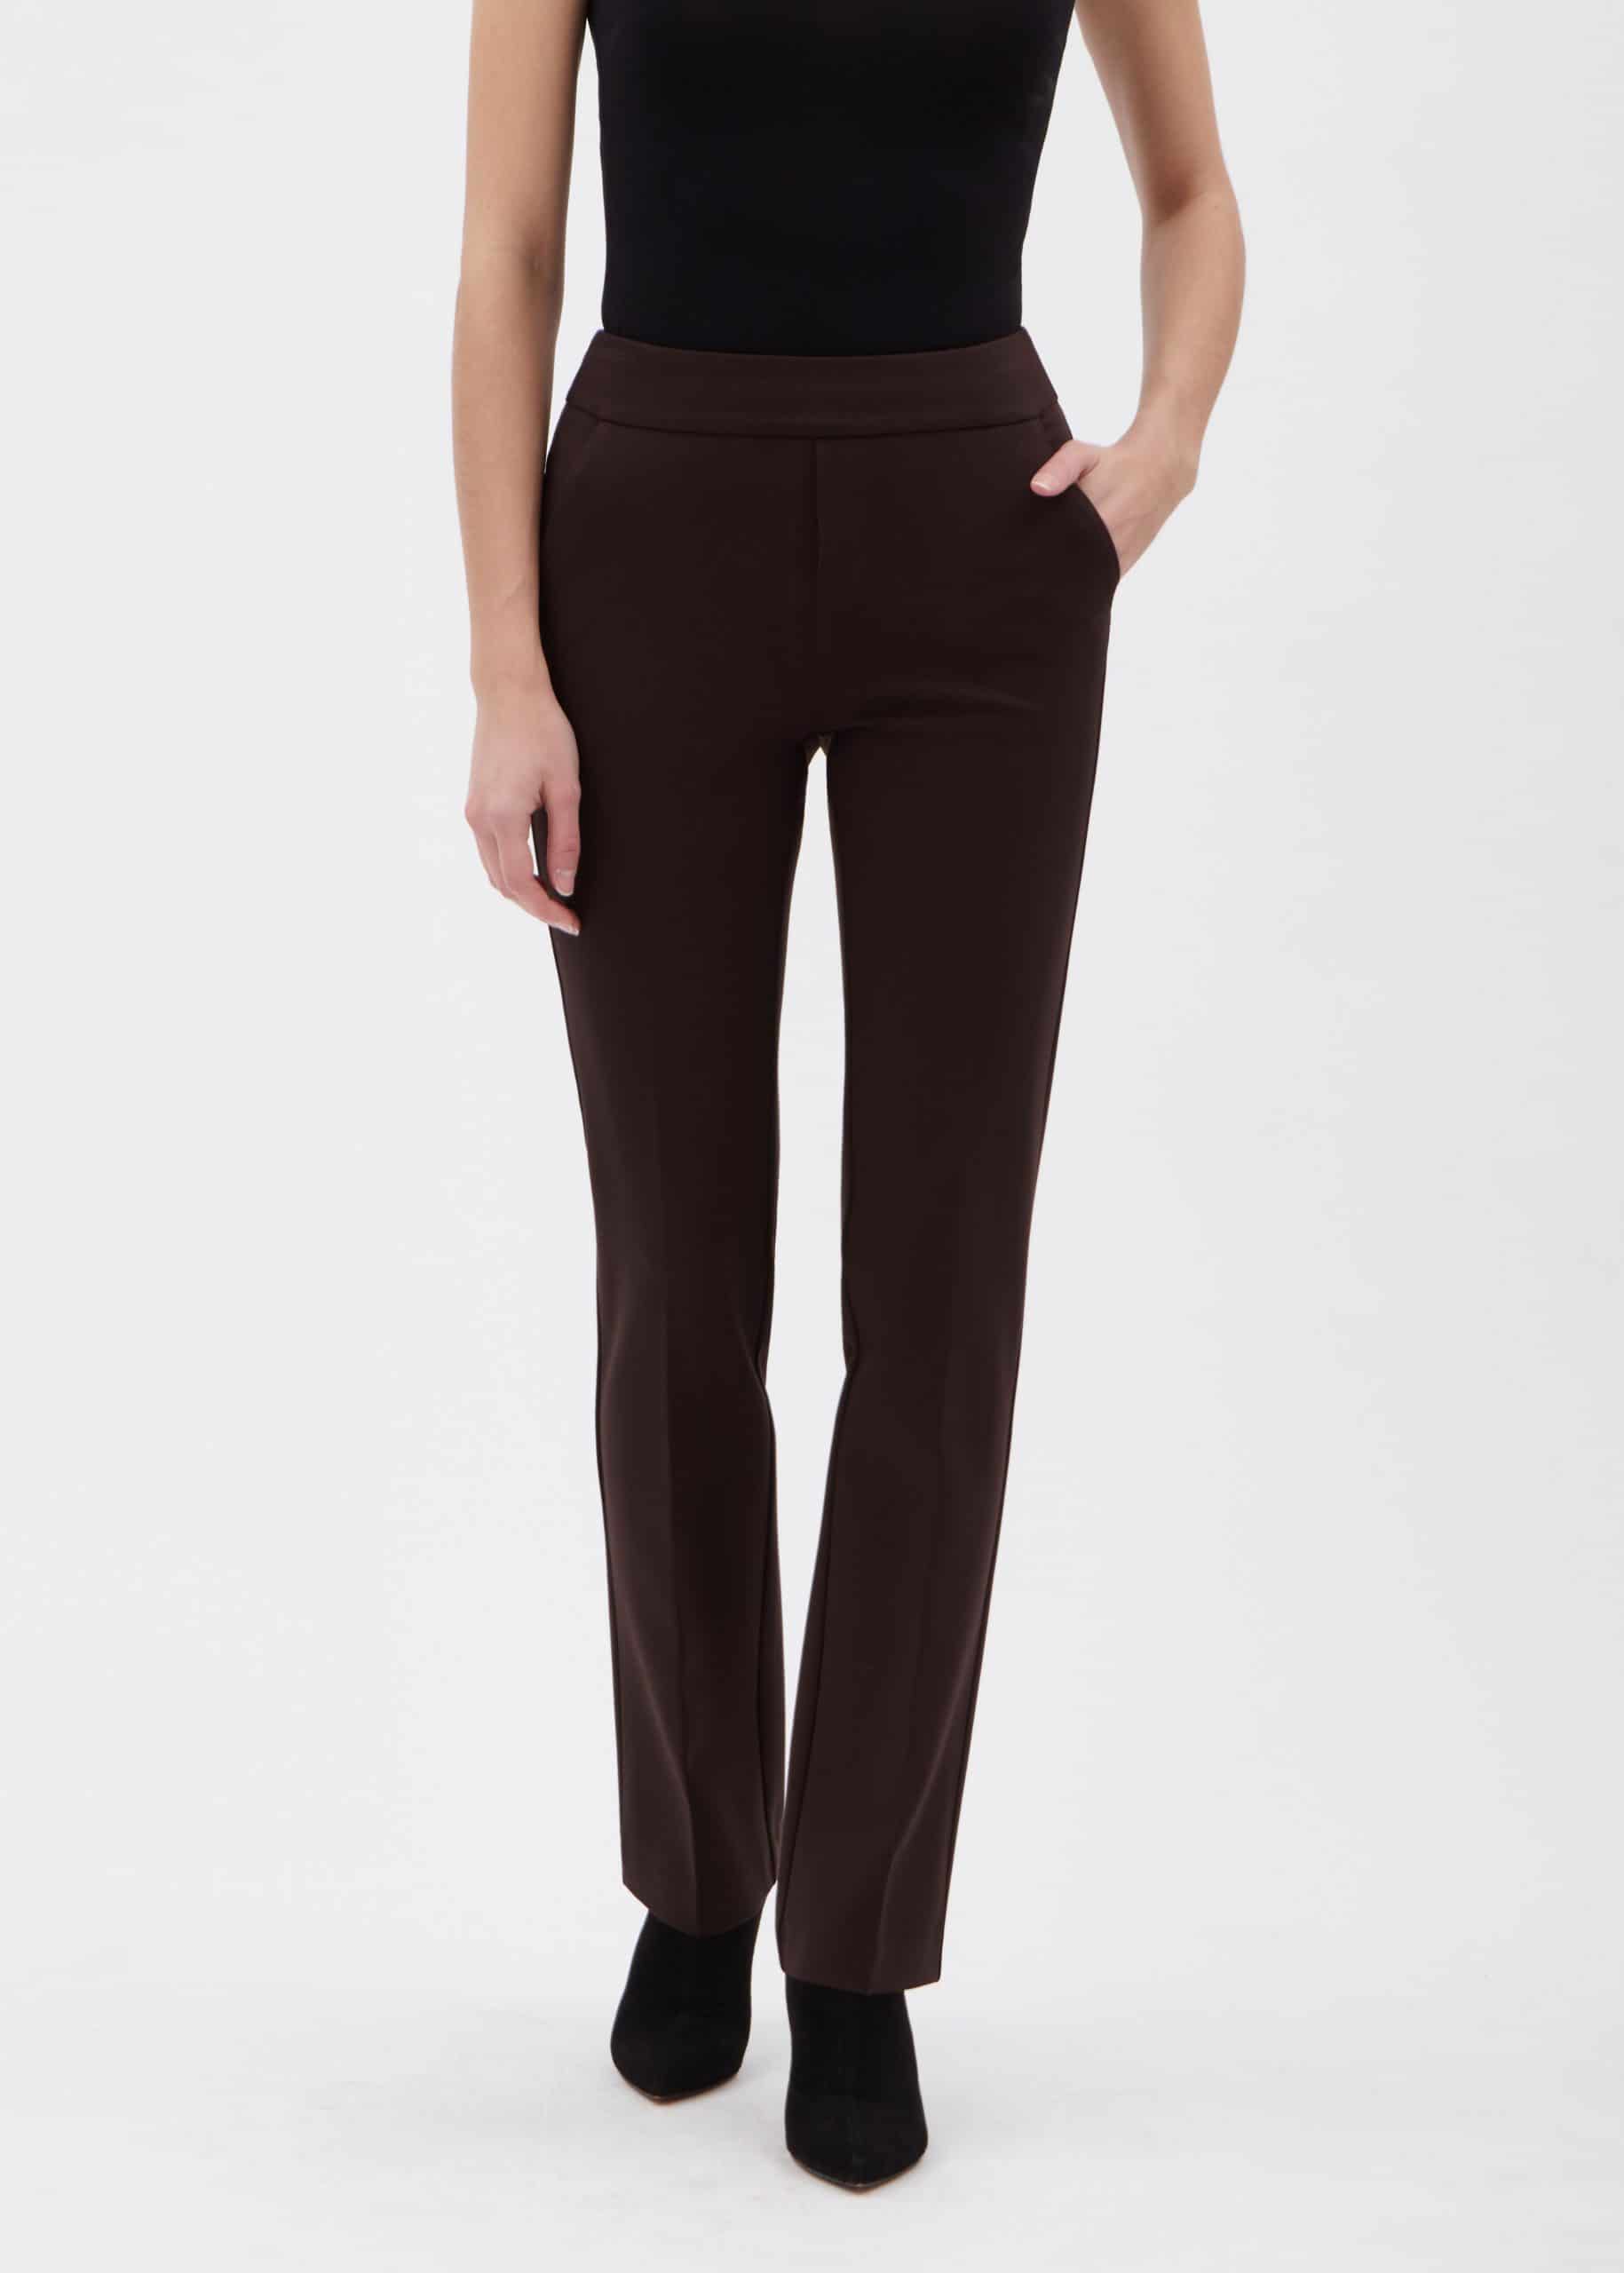 The Perfect Pant Collection - Women's Ponte Pants